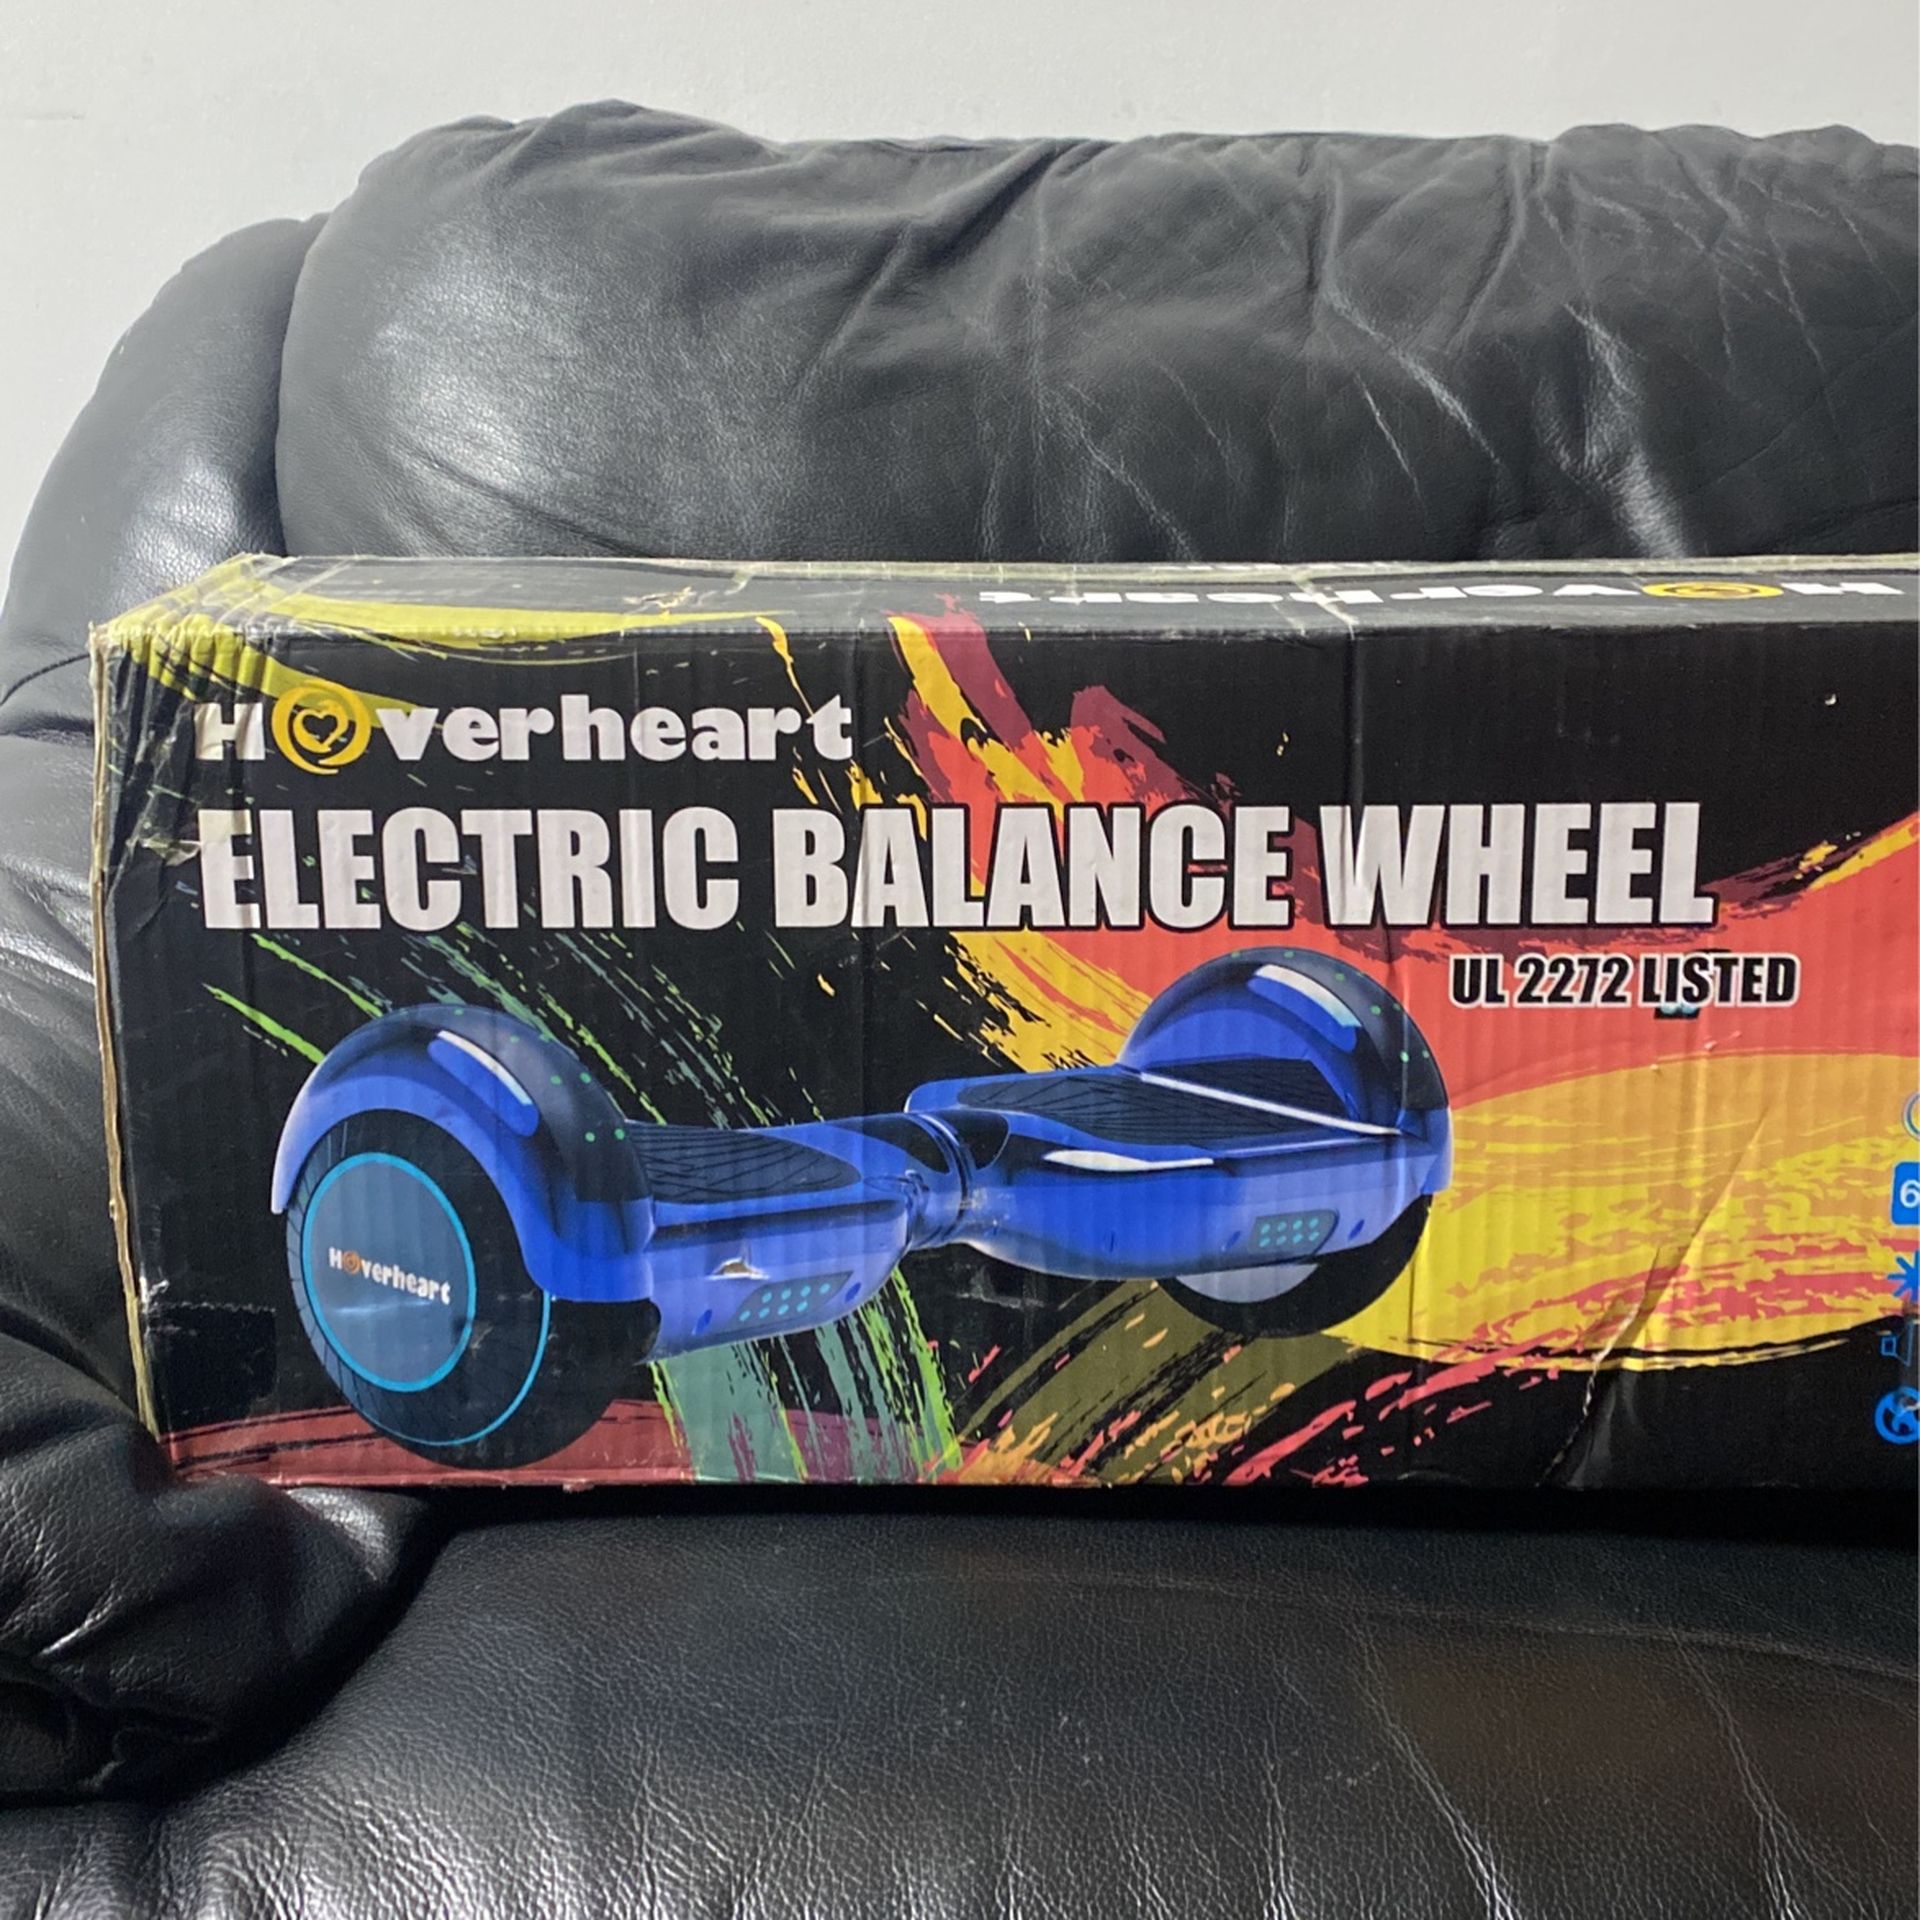 Hoverheart Electric Balance Wheel (Hoverboard)